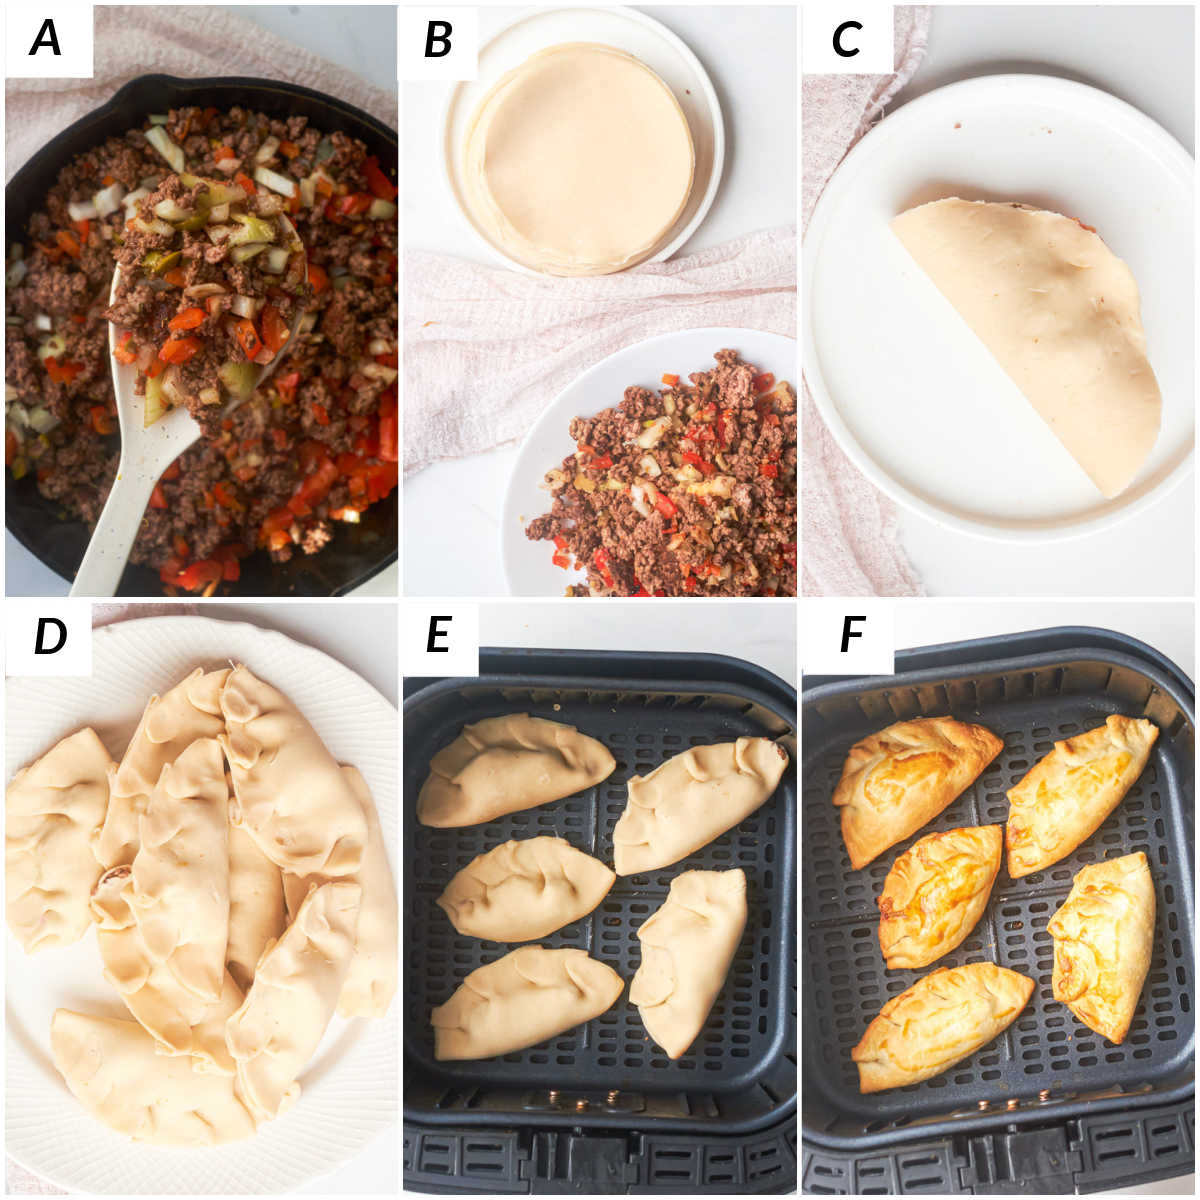 image collage showing some of the steps for making air fryer empanadas